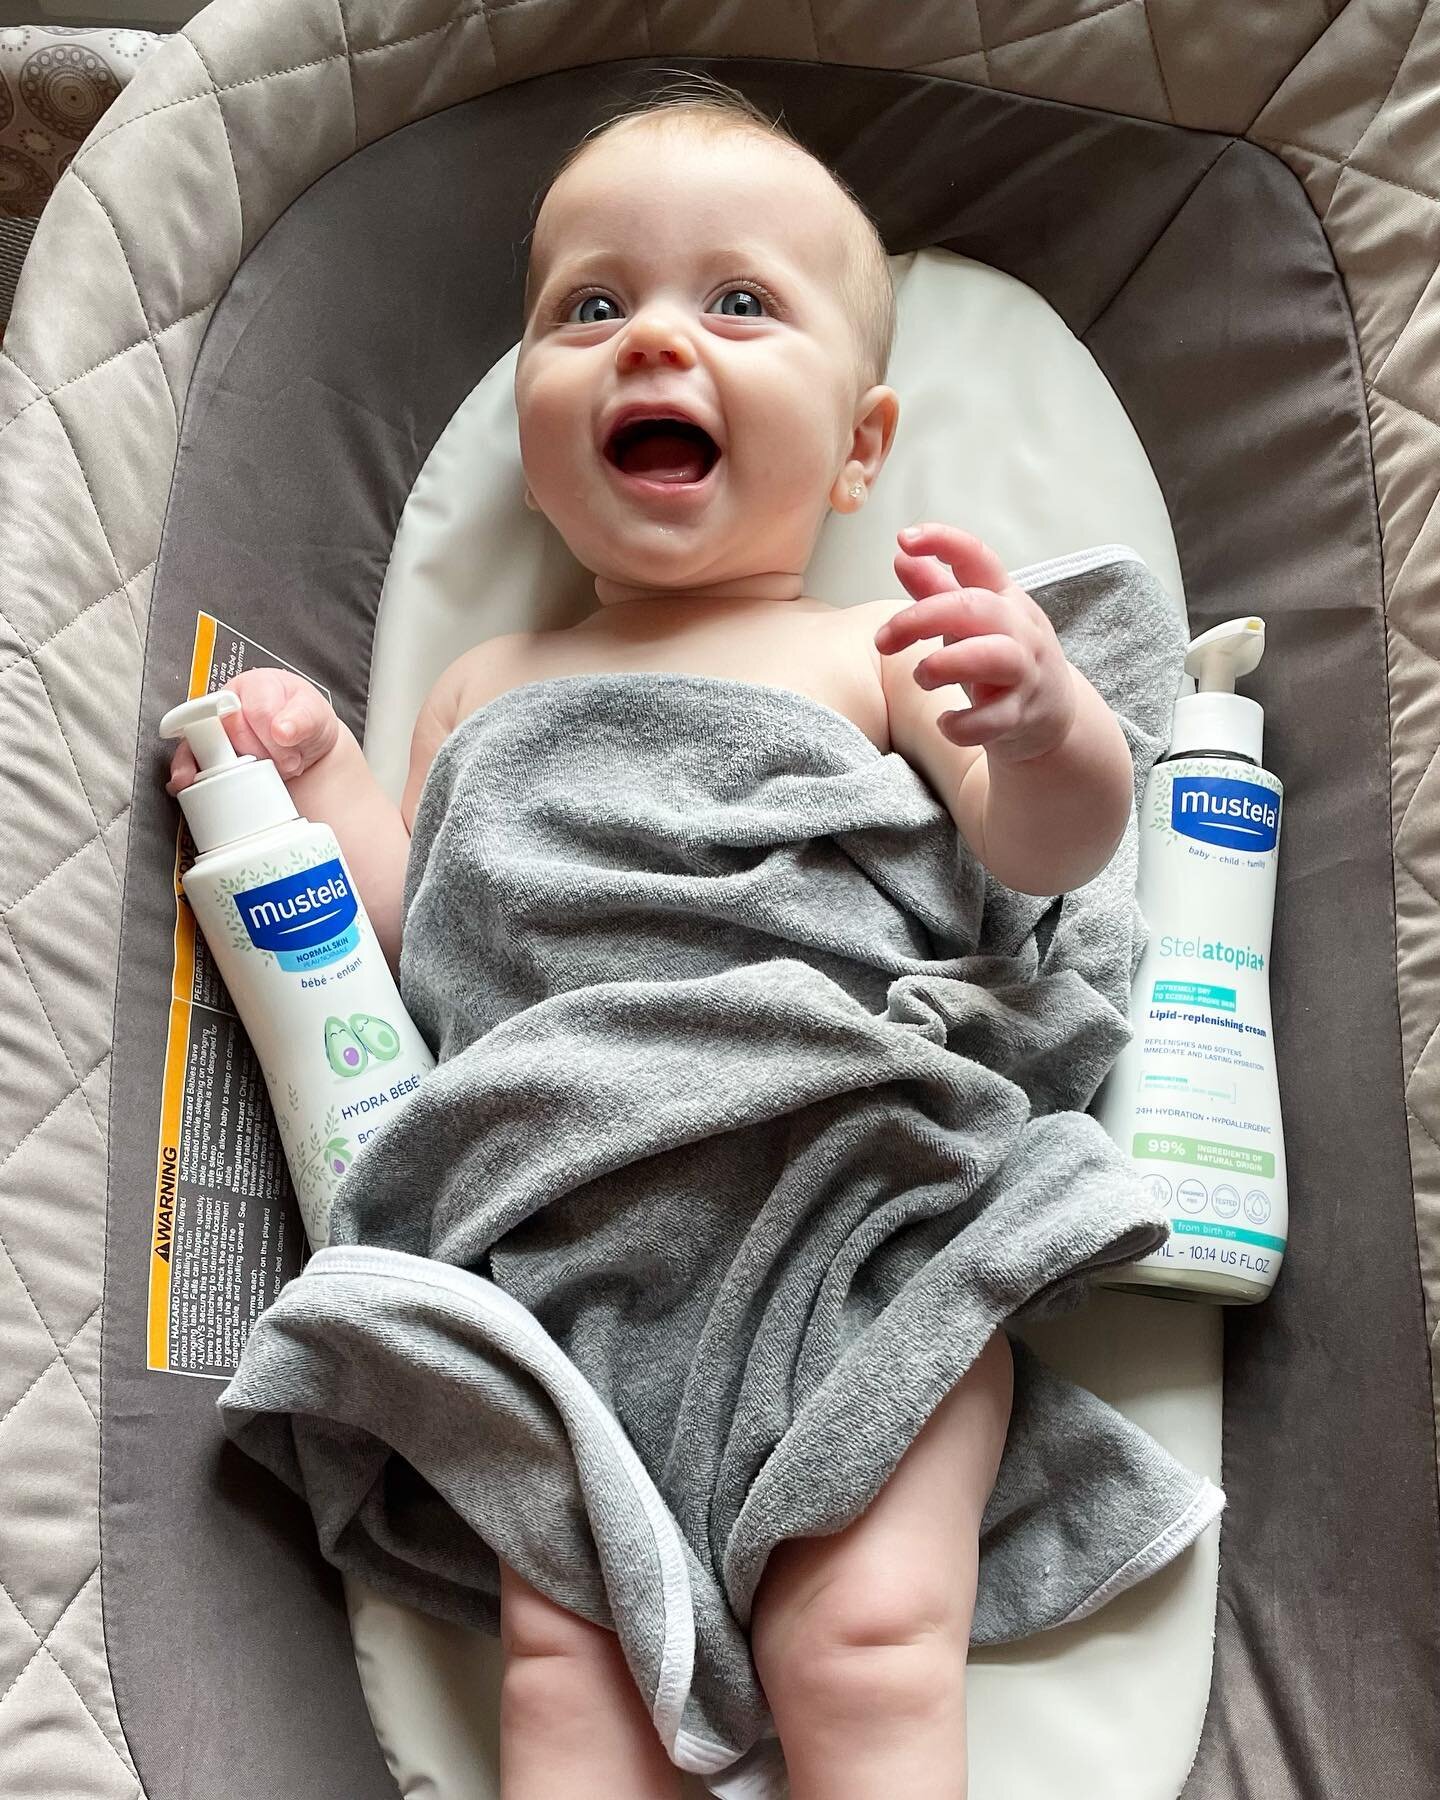 Looks like this babe got her hands on the goods 👀 😂 Introducing our newest client @mustelausa 

Our founder has been using the newest launch #StelatopiaLipidReplenishingCream on her daughter who has sensitive skin and is eczema prone and it&rsquo;s